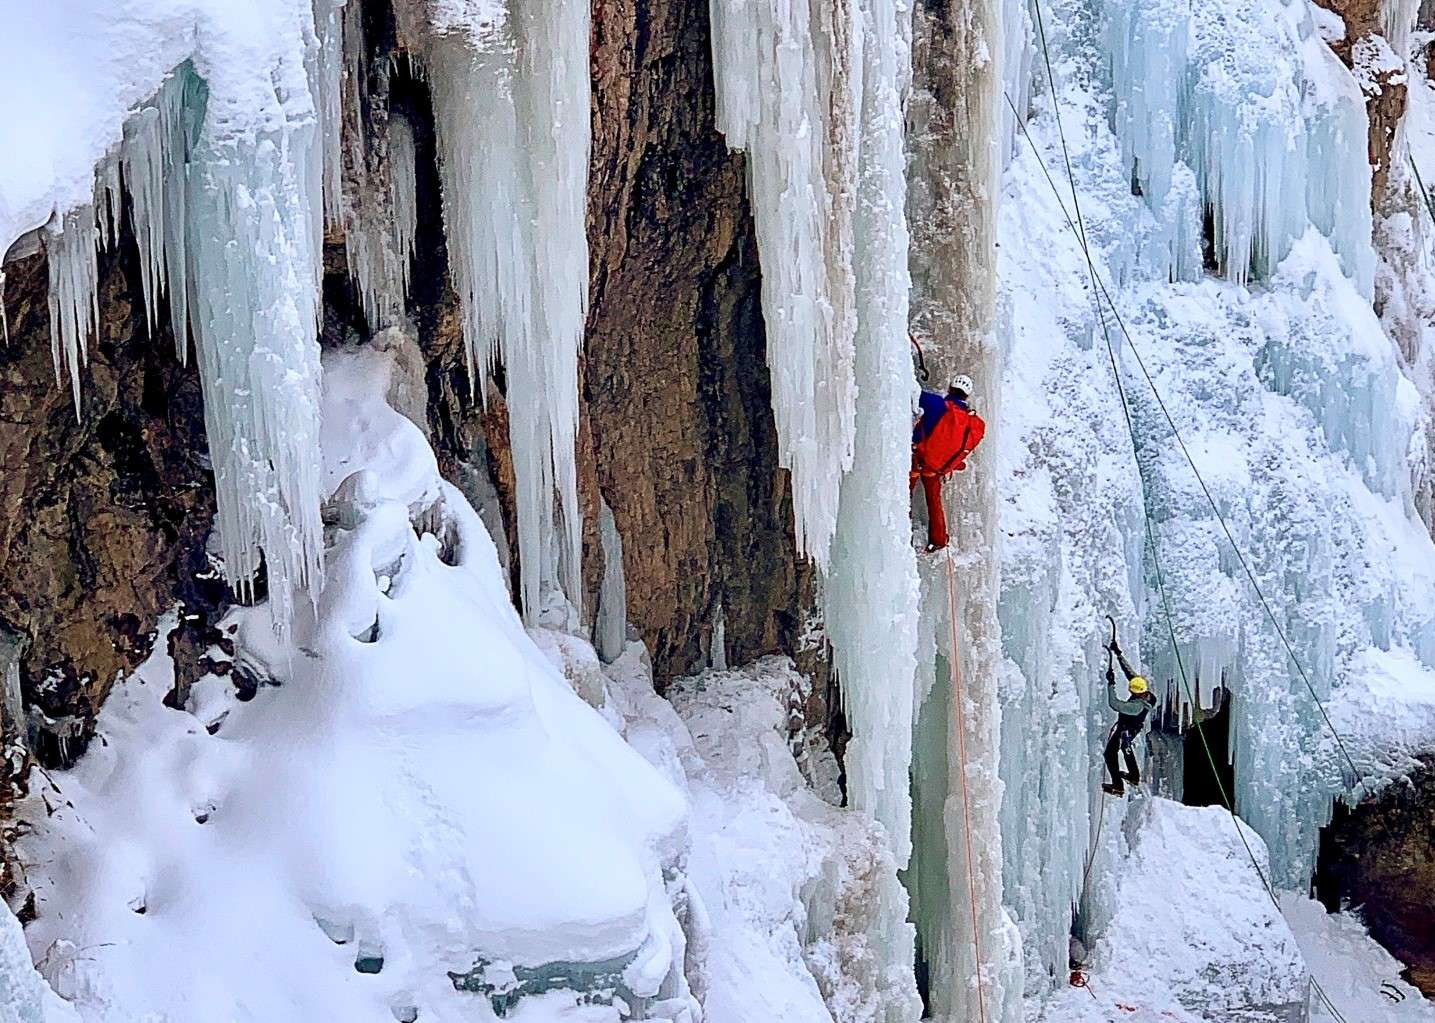 Two people climbing ice in Ouray.